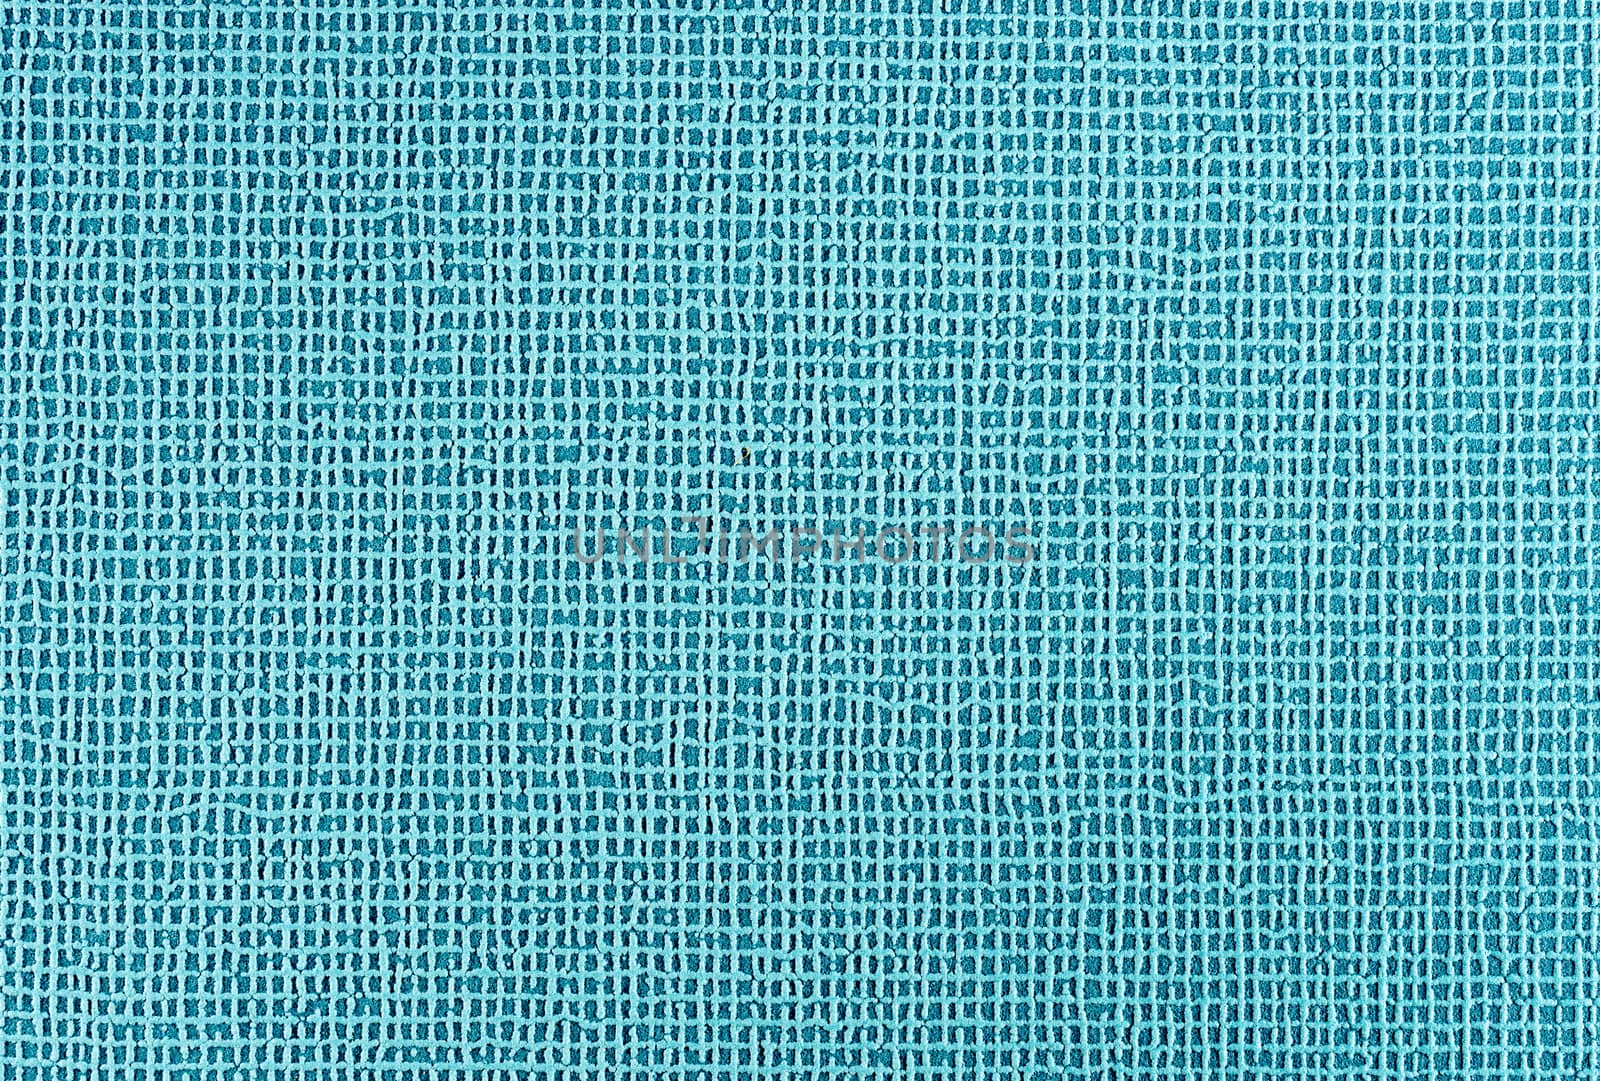 texture on paper background in blue squares